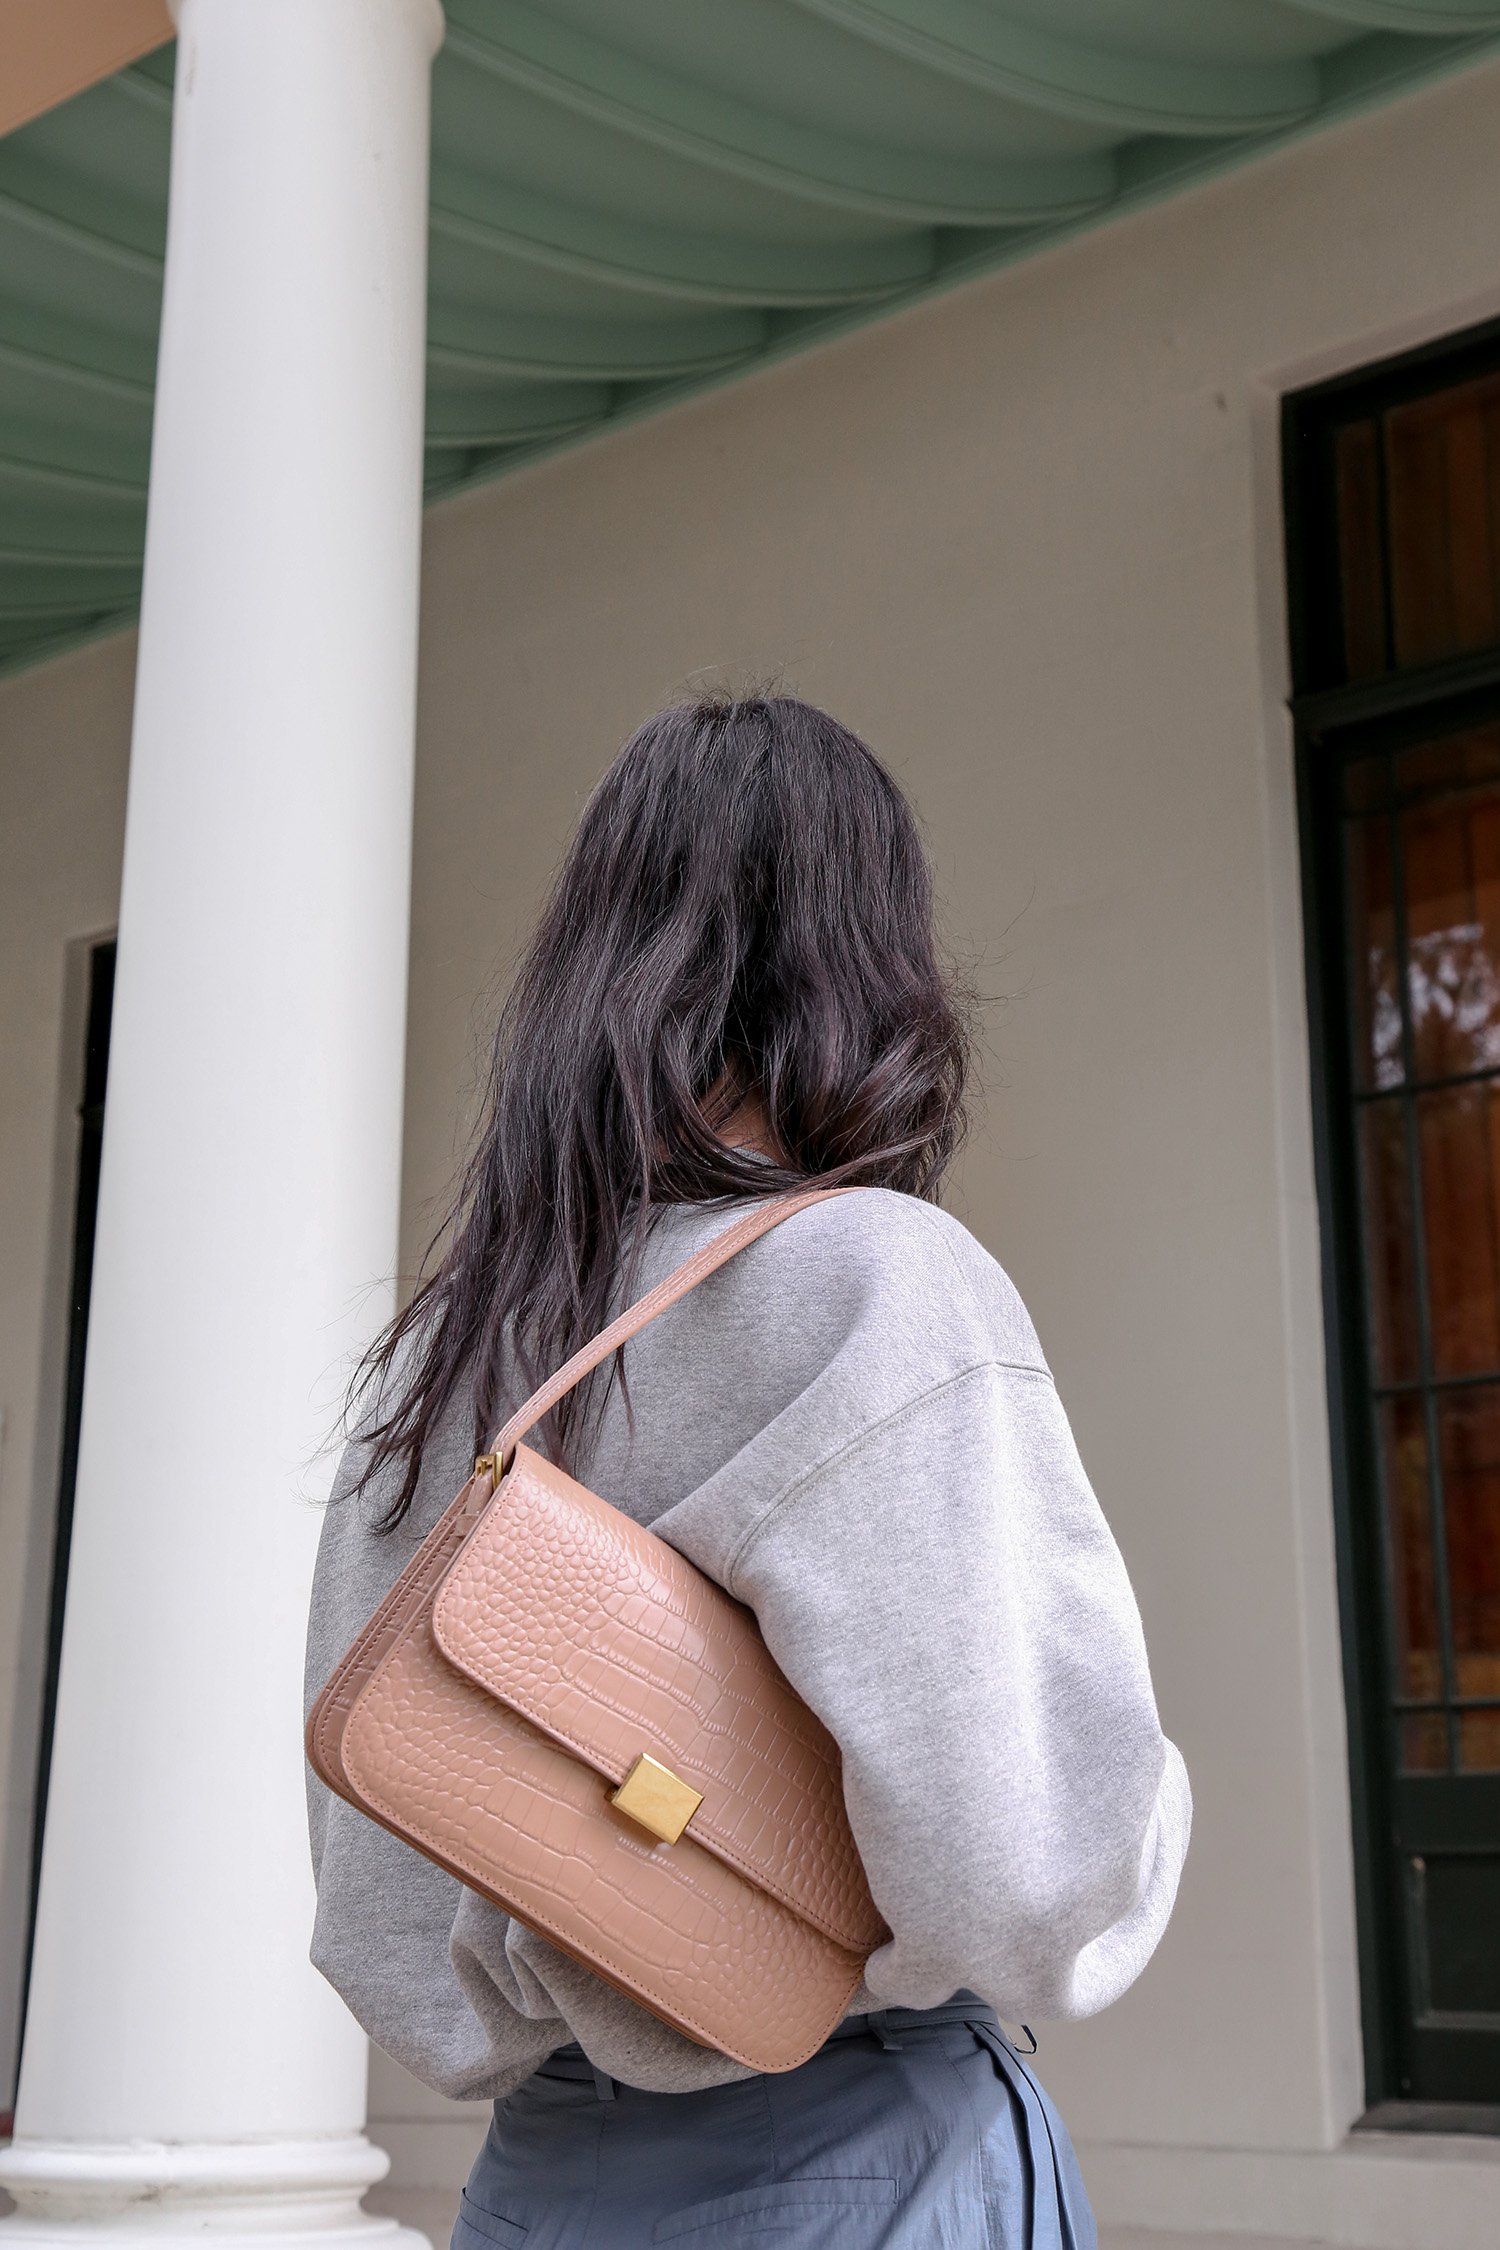 The Curated shoulder bag